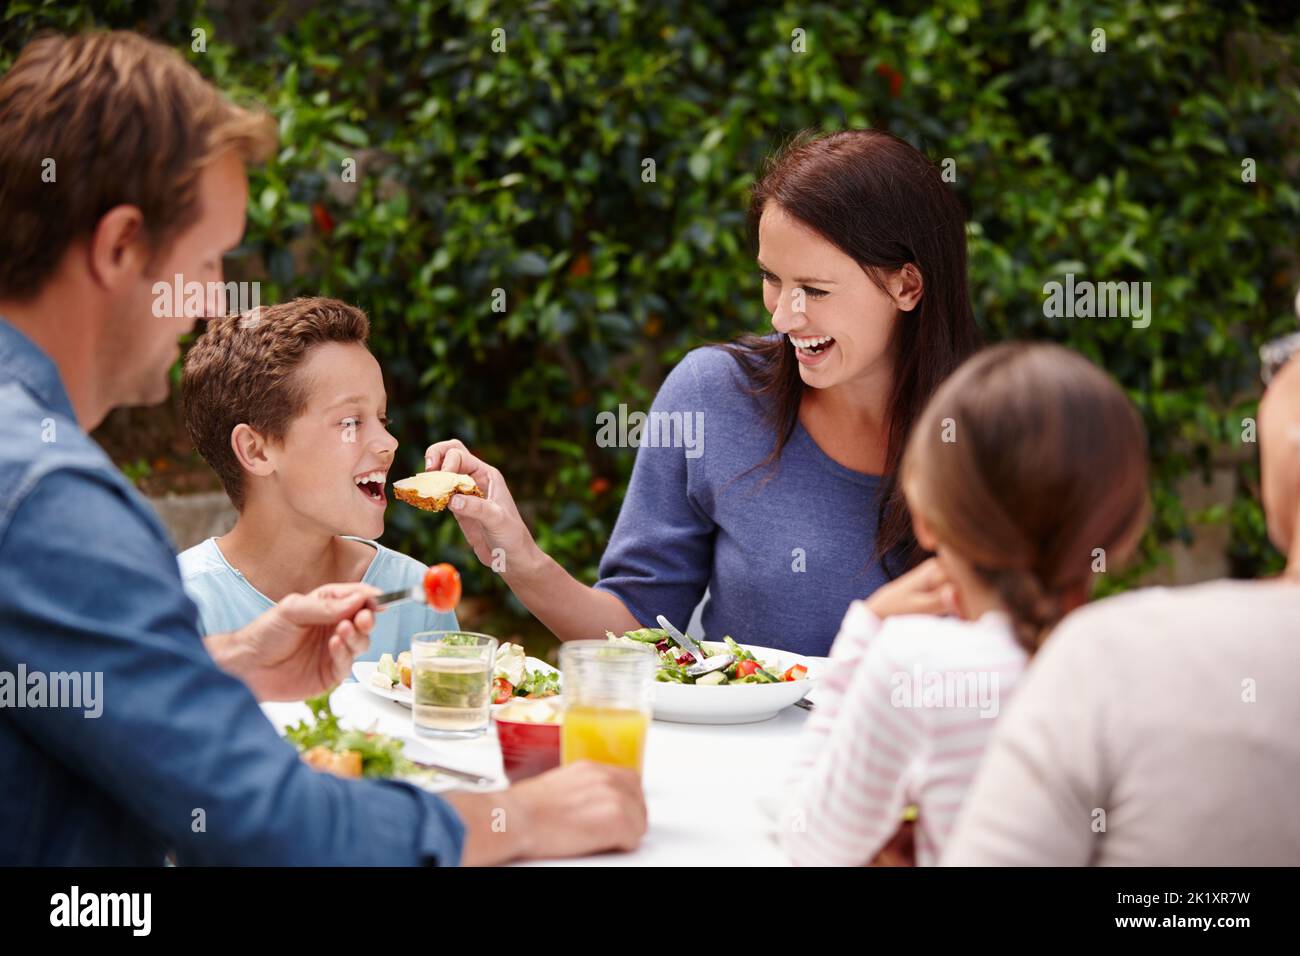 Sharing is caring. a happy multi-generational family having a meal together outside. Stock Photo